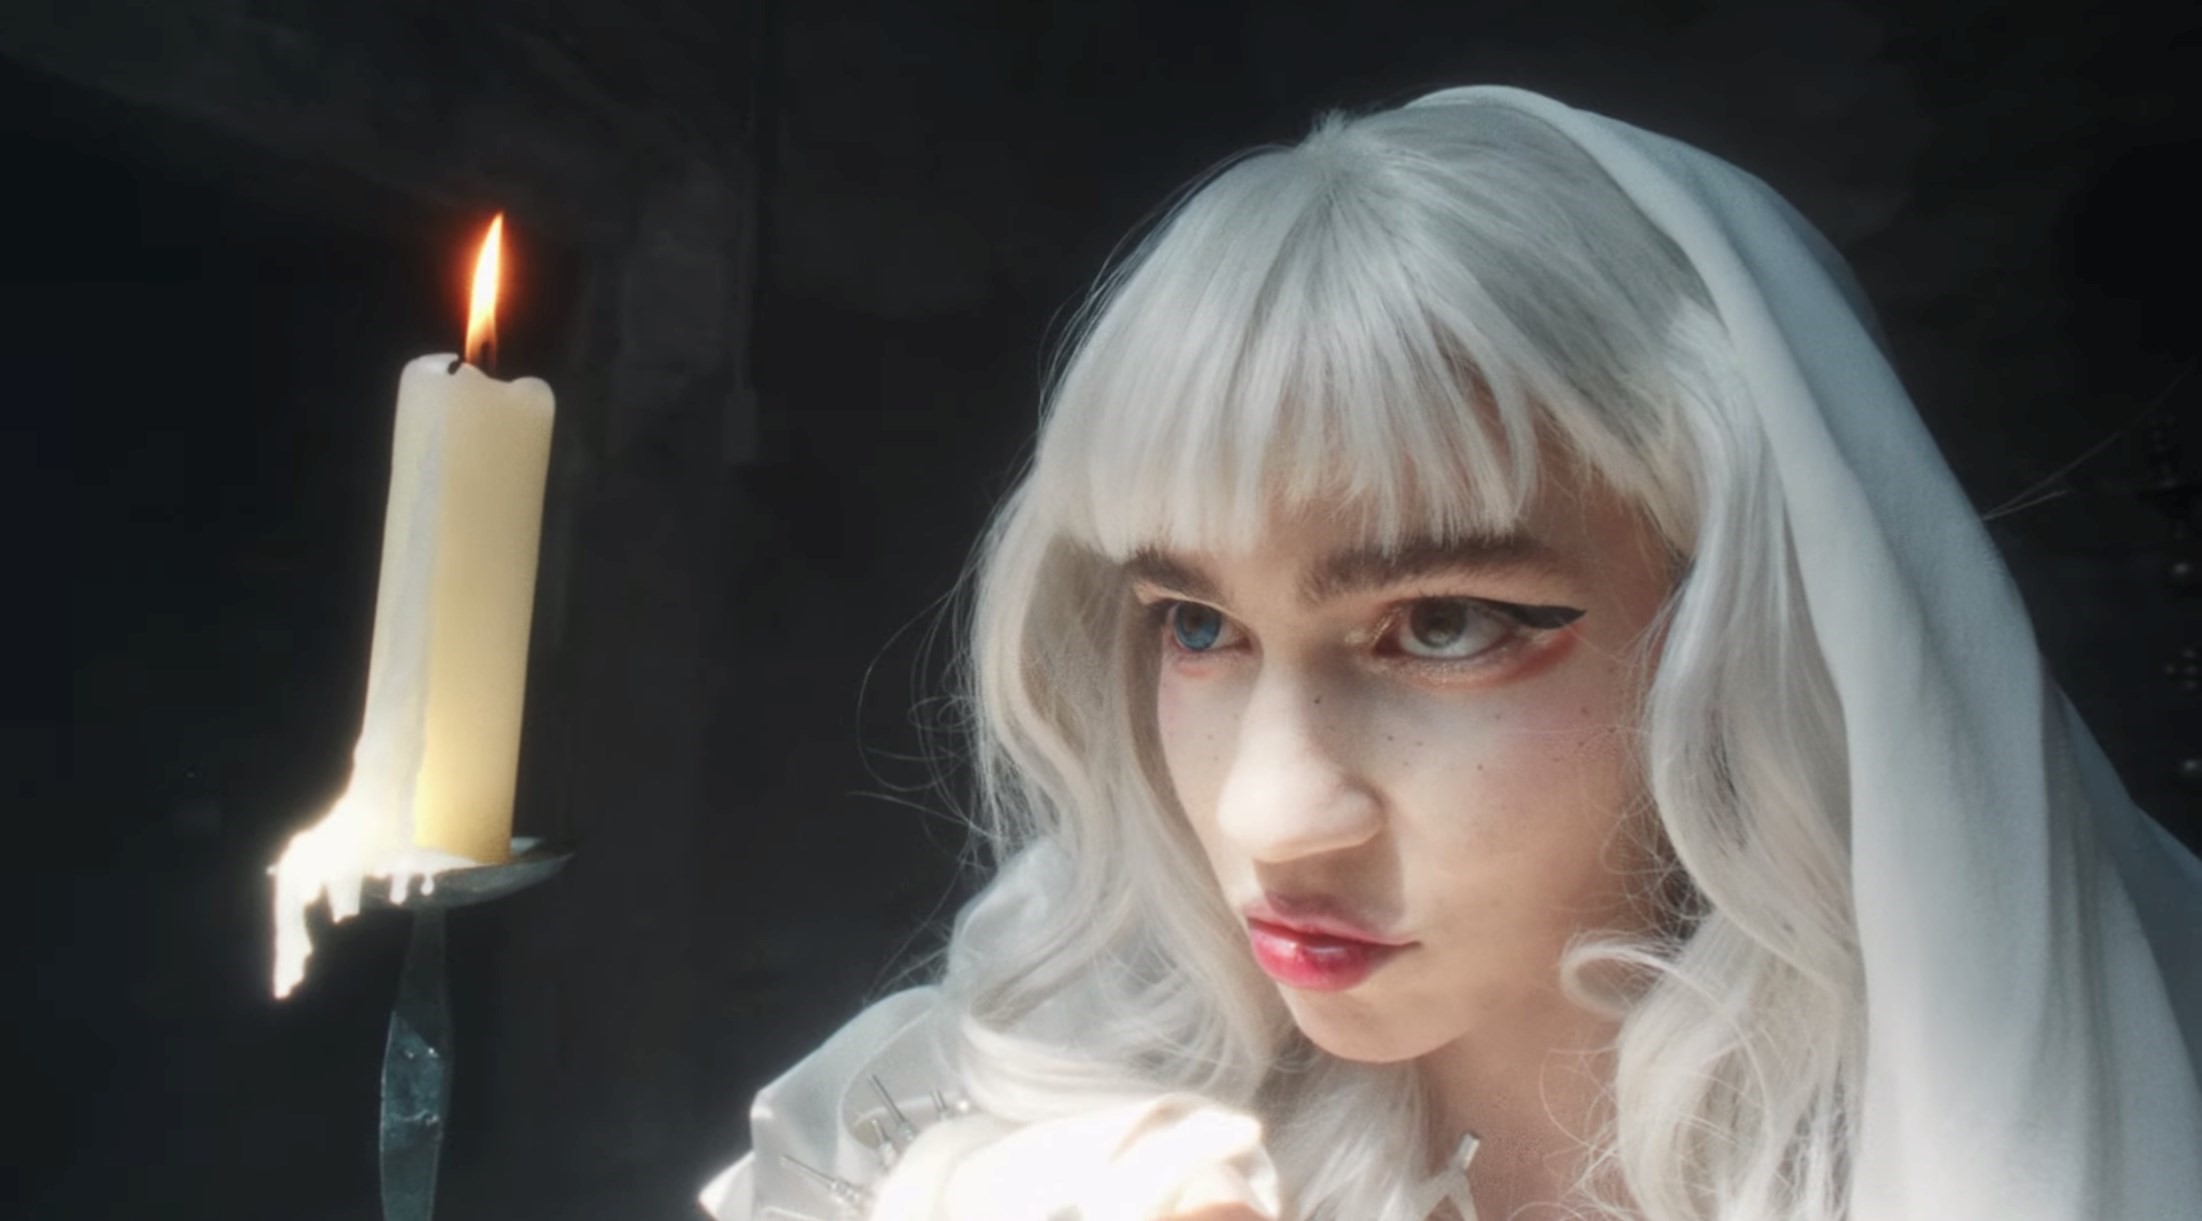 Grimes – Player Of Games on Vimeo